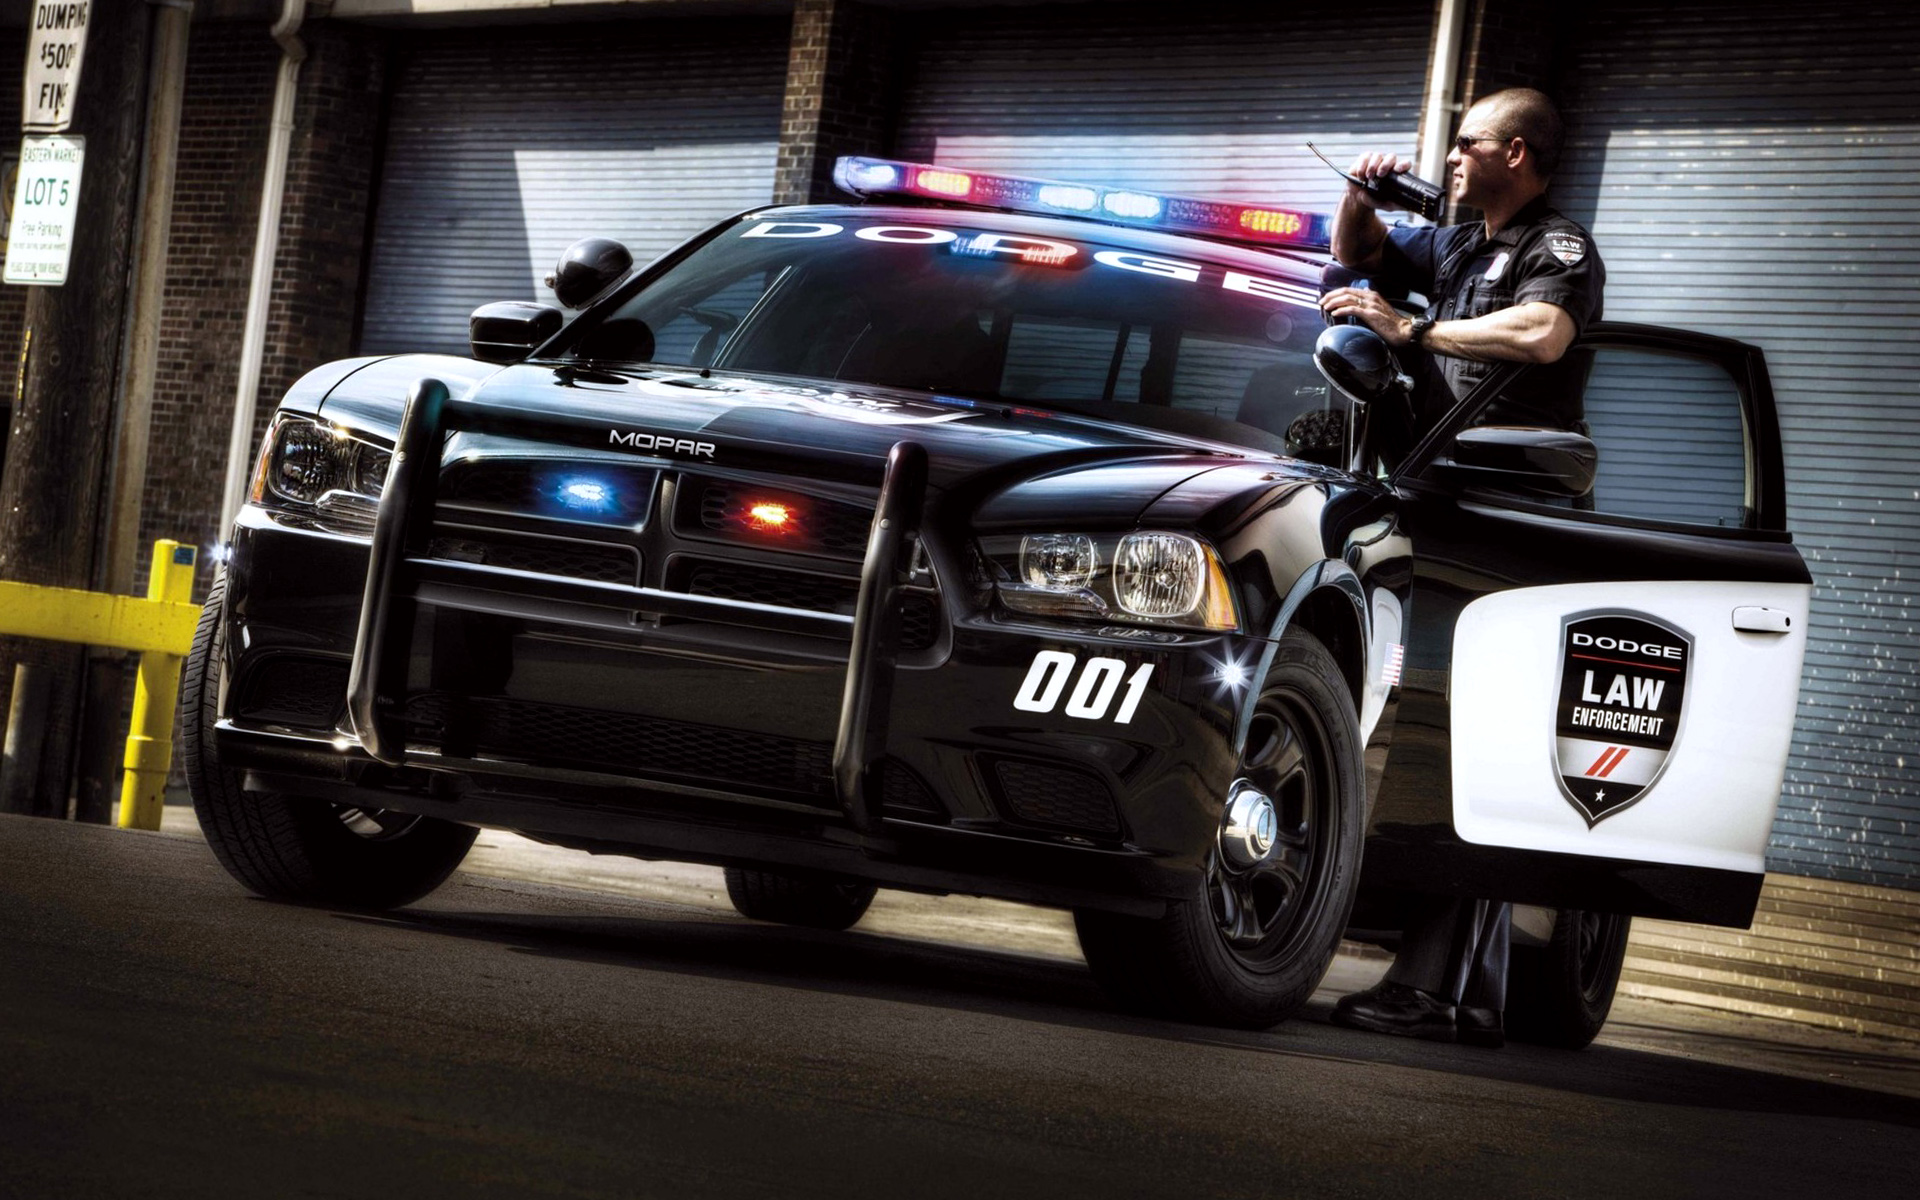 Cool Police Car Action Wallpapers HD / Desktop and Mobile Backgrounds